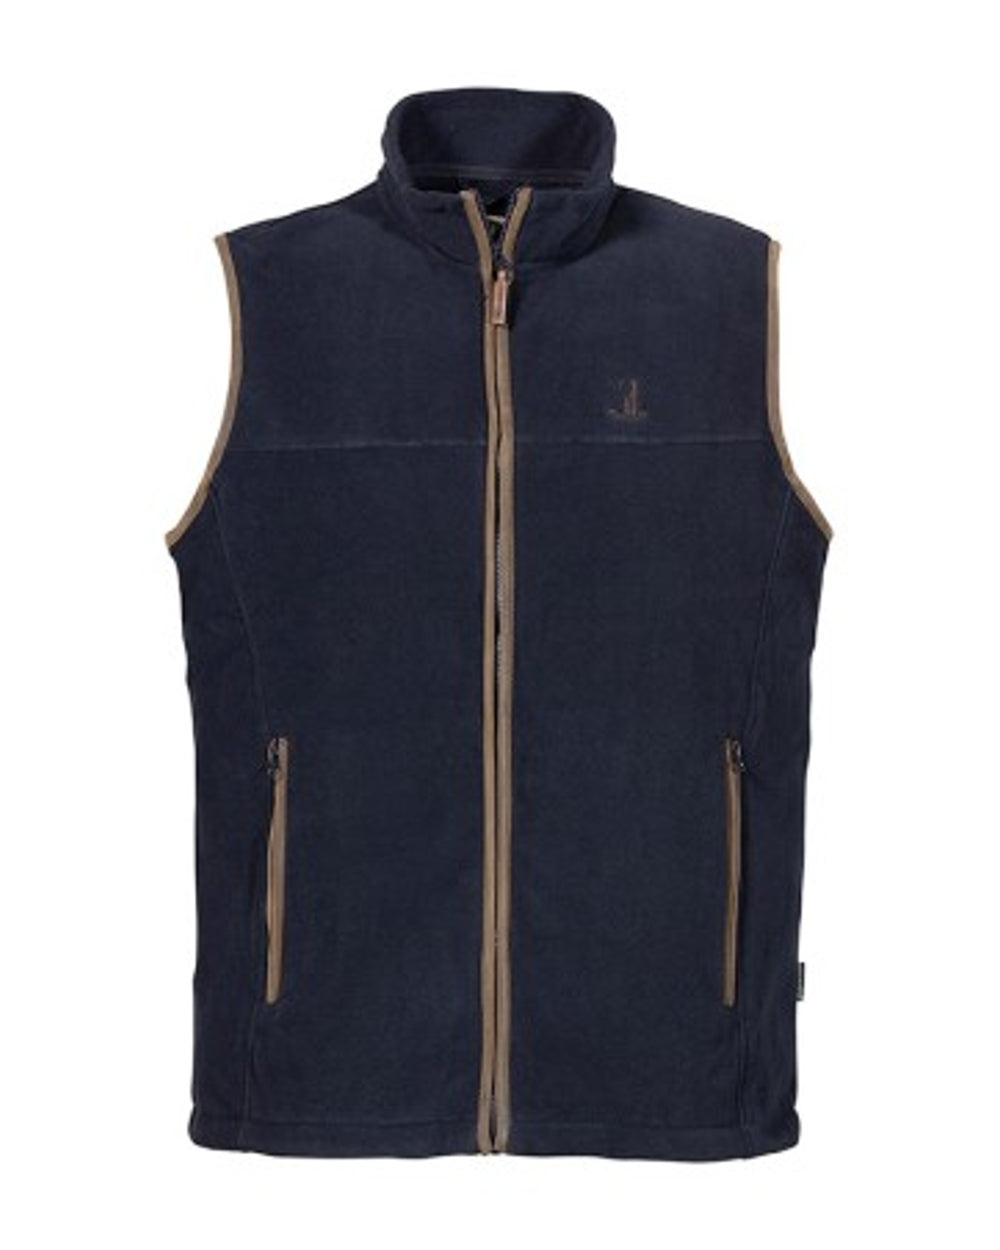 Percussion Childrens Scotland Gilet in Navy 